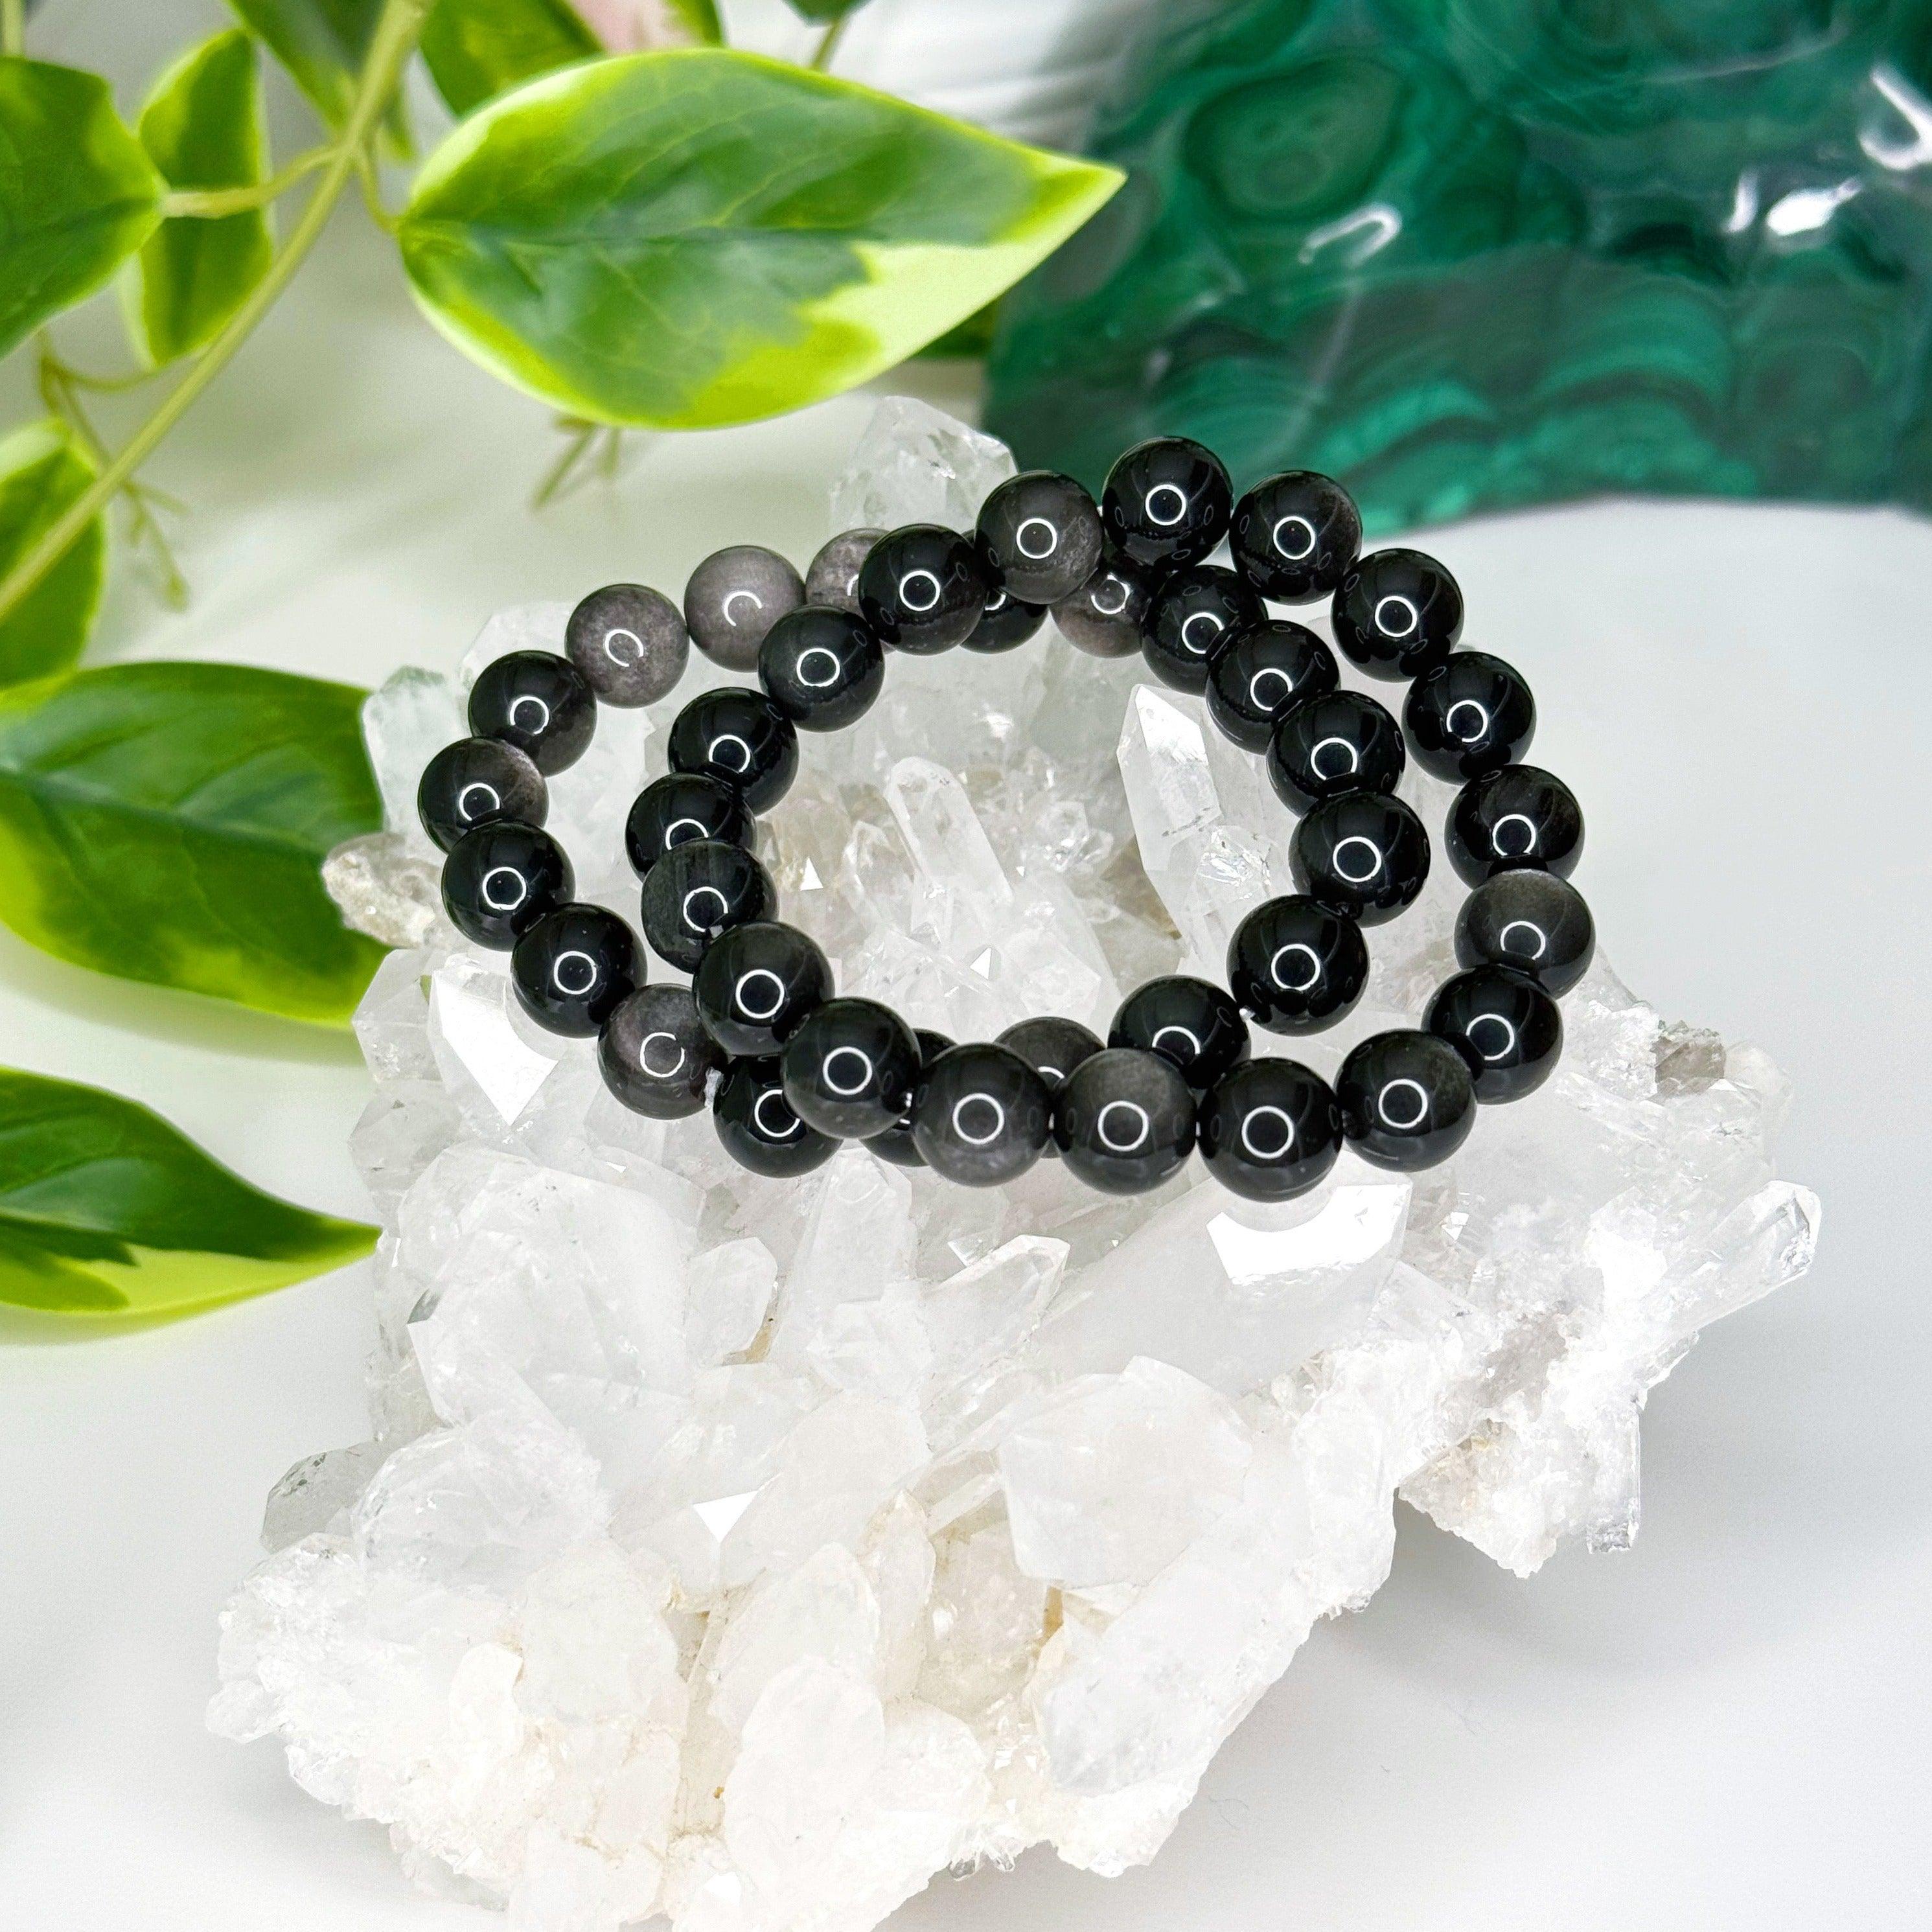 SILVER SHEEN OBSIDIAN 10mm - HANDMADE CRYSTAL BRACELET - 10mm, black, bracelet, crystal bracelet, Friday the 13th, handmade bracelet, jewelry, market bracelet, obsidian, protection gift bundle, recently added, Scorpio Season, silver sheen obsidian, Wearable - The Mineral Maven